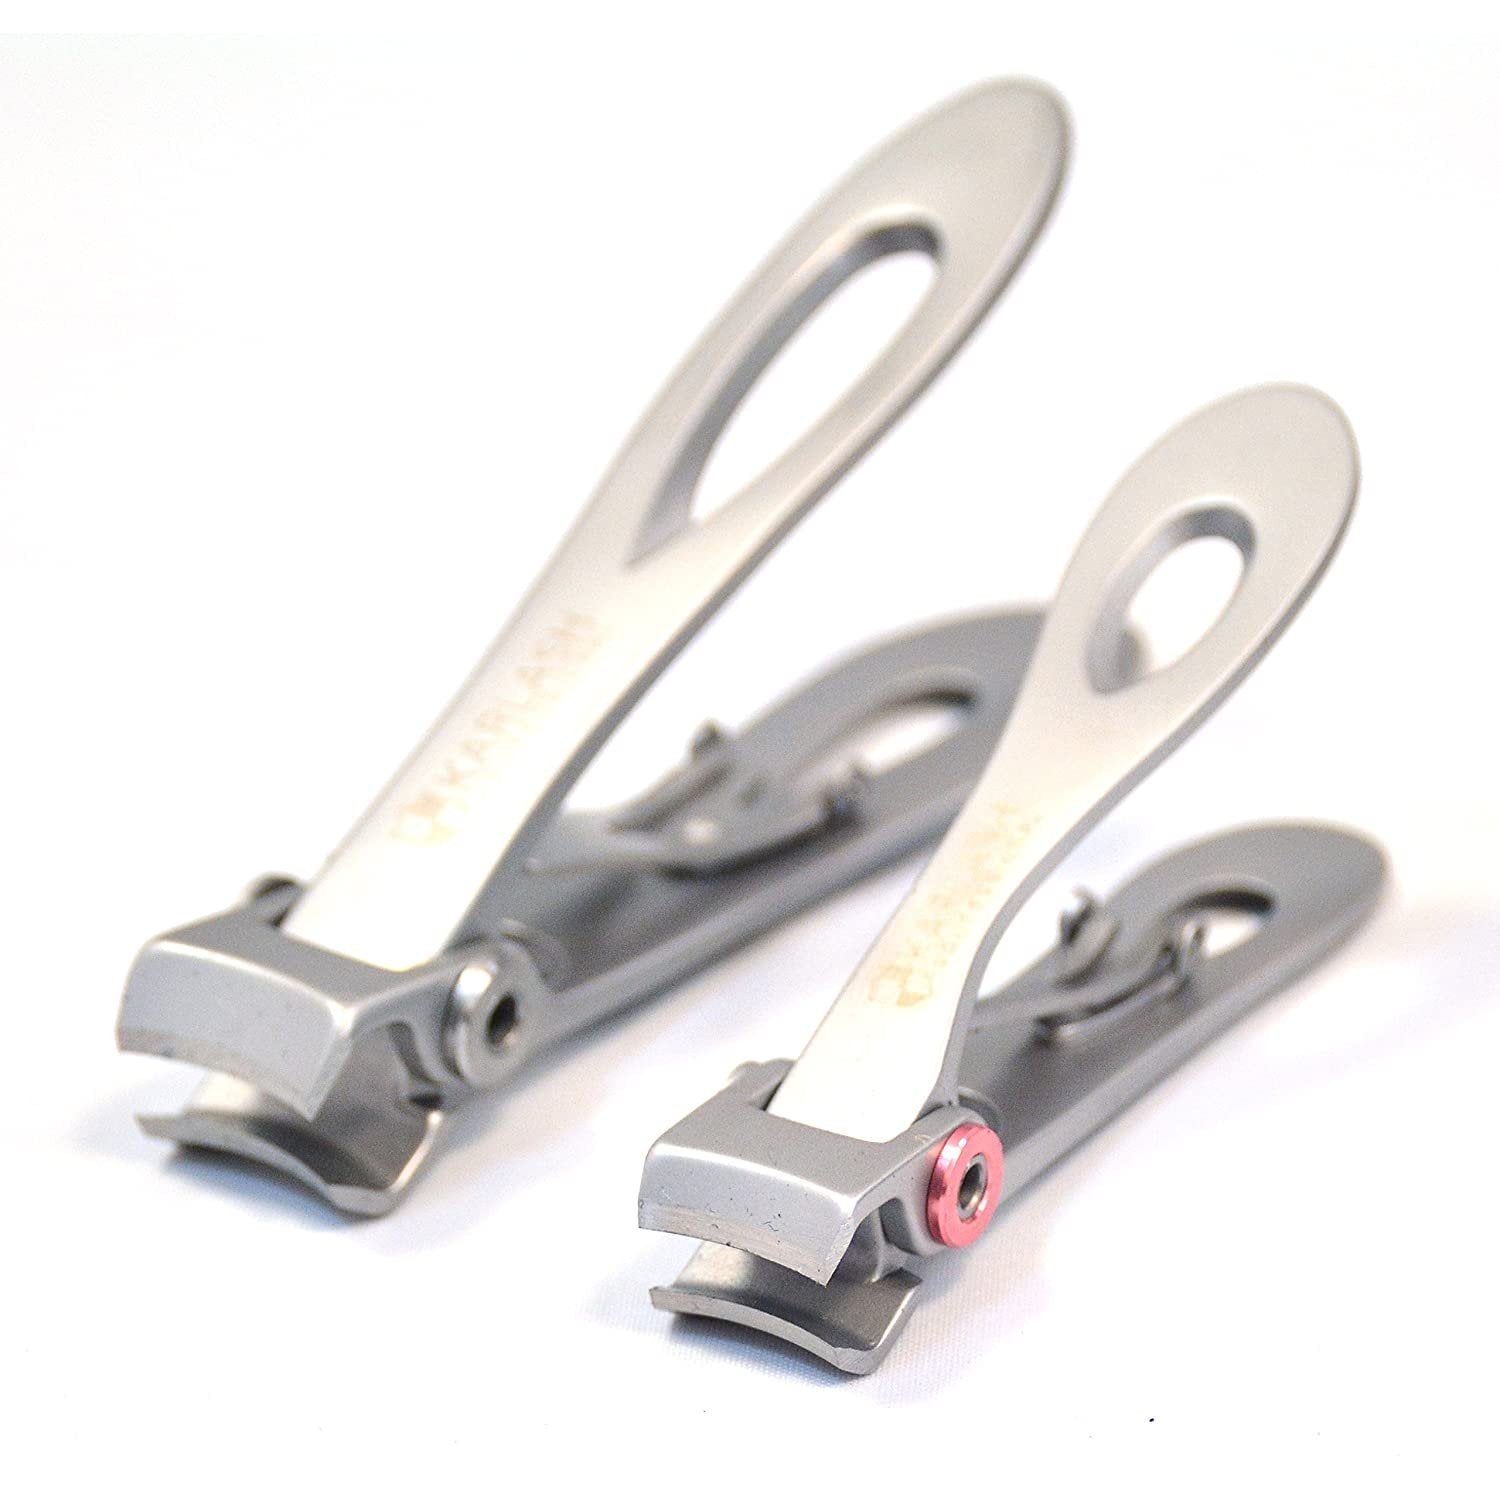 Karlash Stainless Steel Toe and Nail Clipper with Ring Lock System Duo Kit 2 Pc